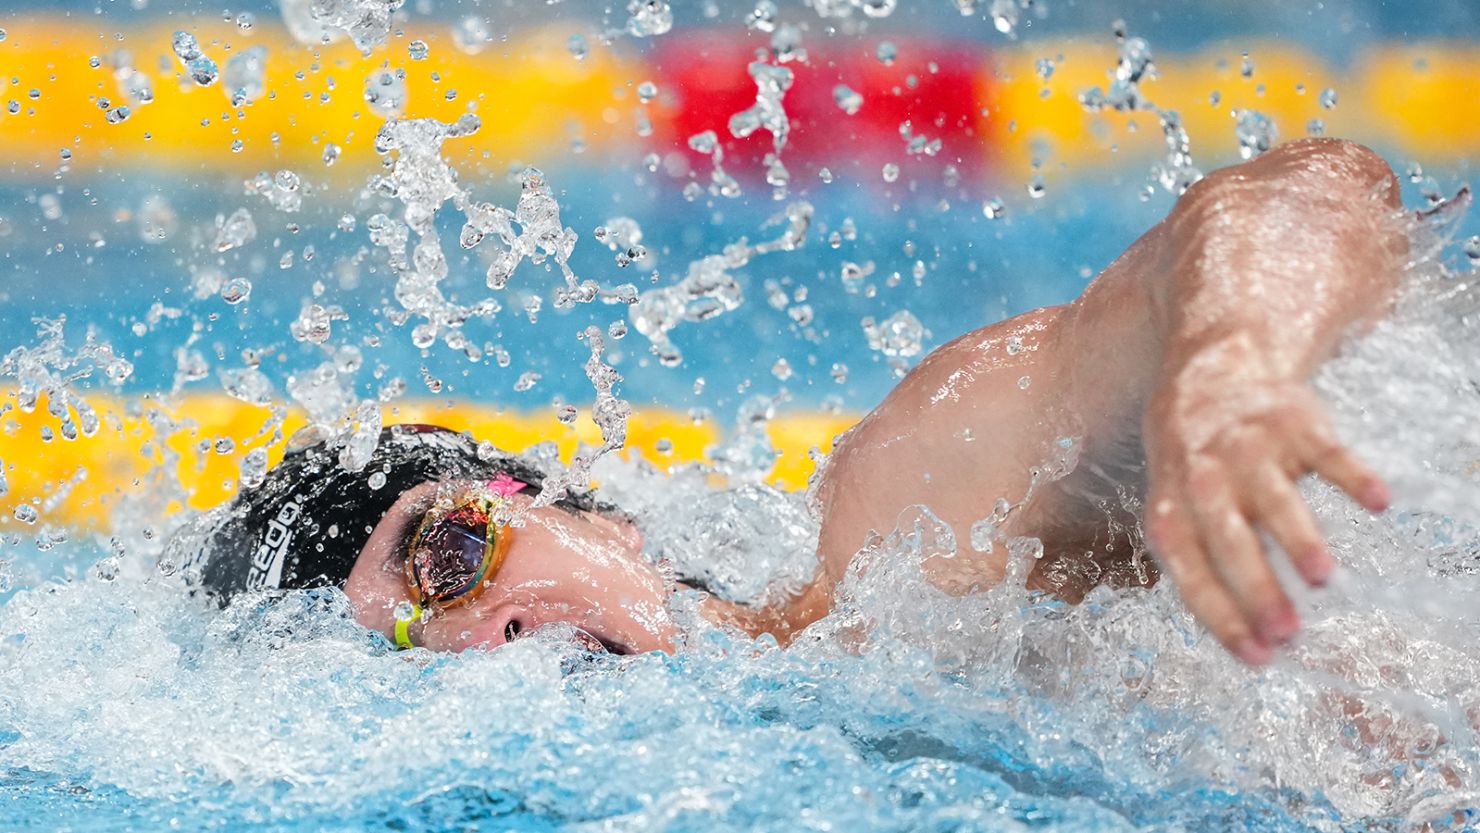 Zhanle Pan in the men's 4x100 meter freestyle final at the 2024 World Aquatics Championships in Doha, Qatar.